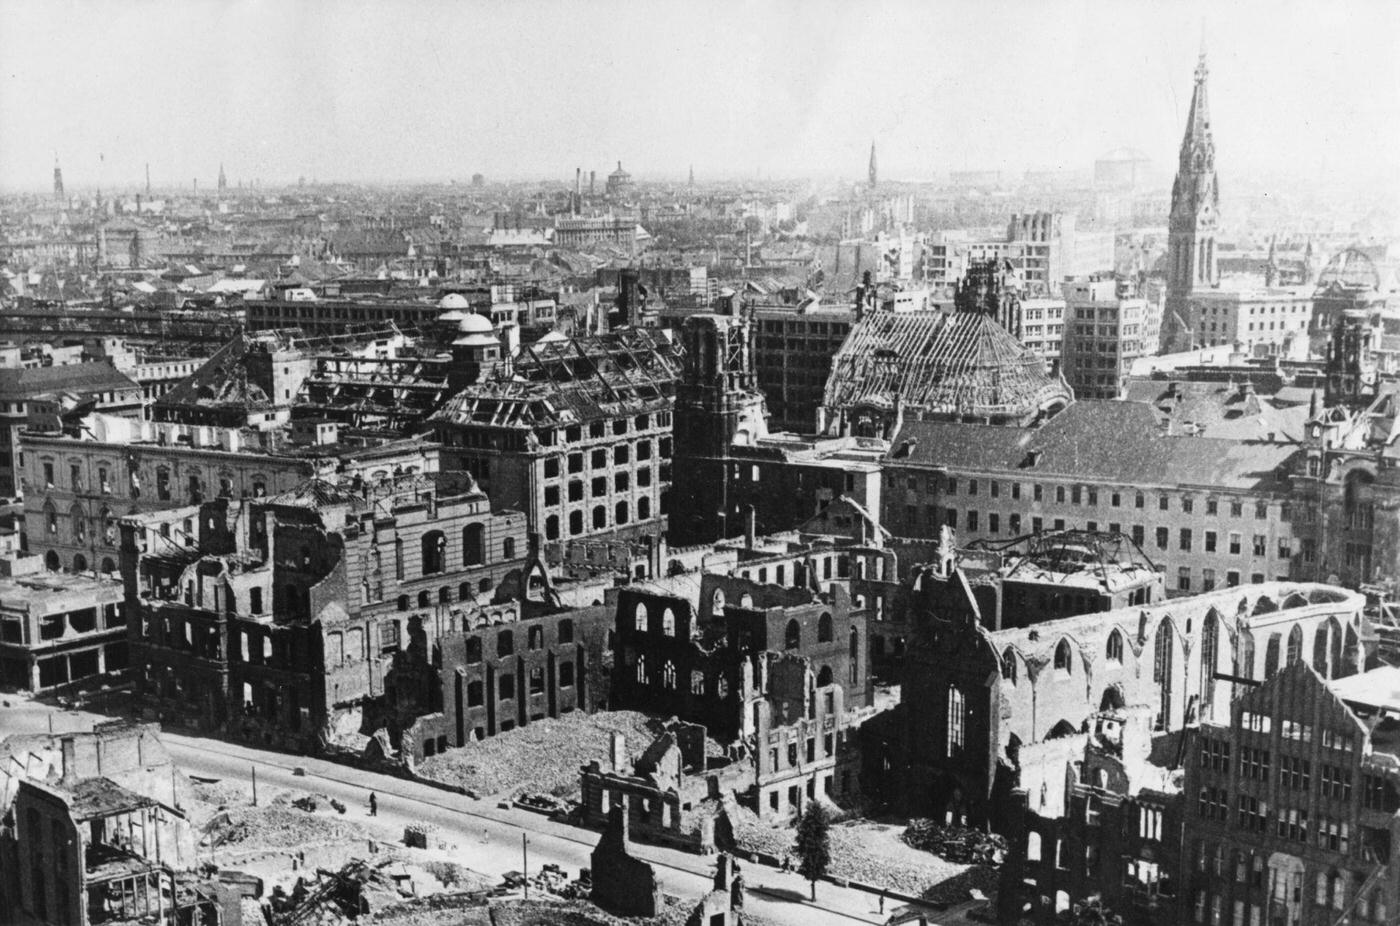 View over the ruins of East Berlin with the ruins of the Klosterkirche, Germany, circa 1945.